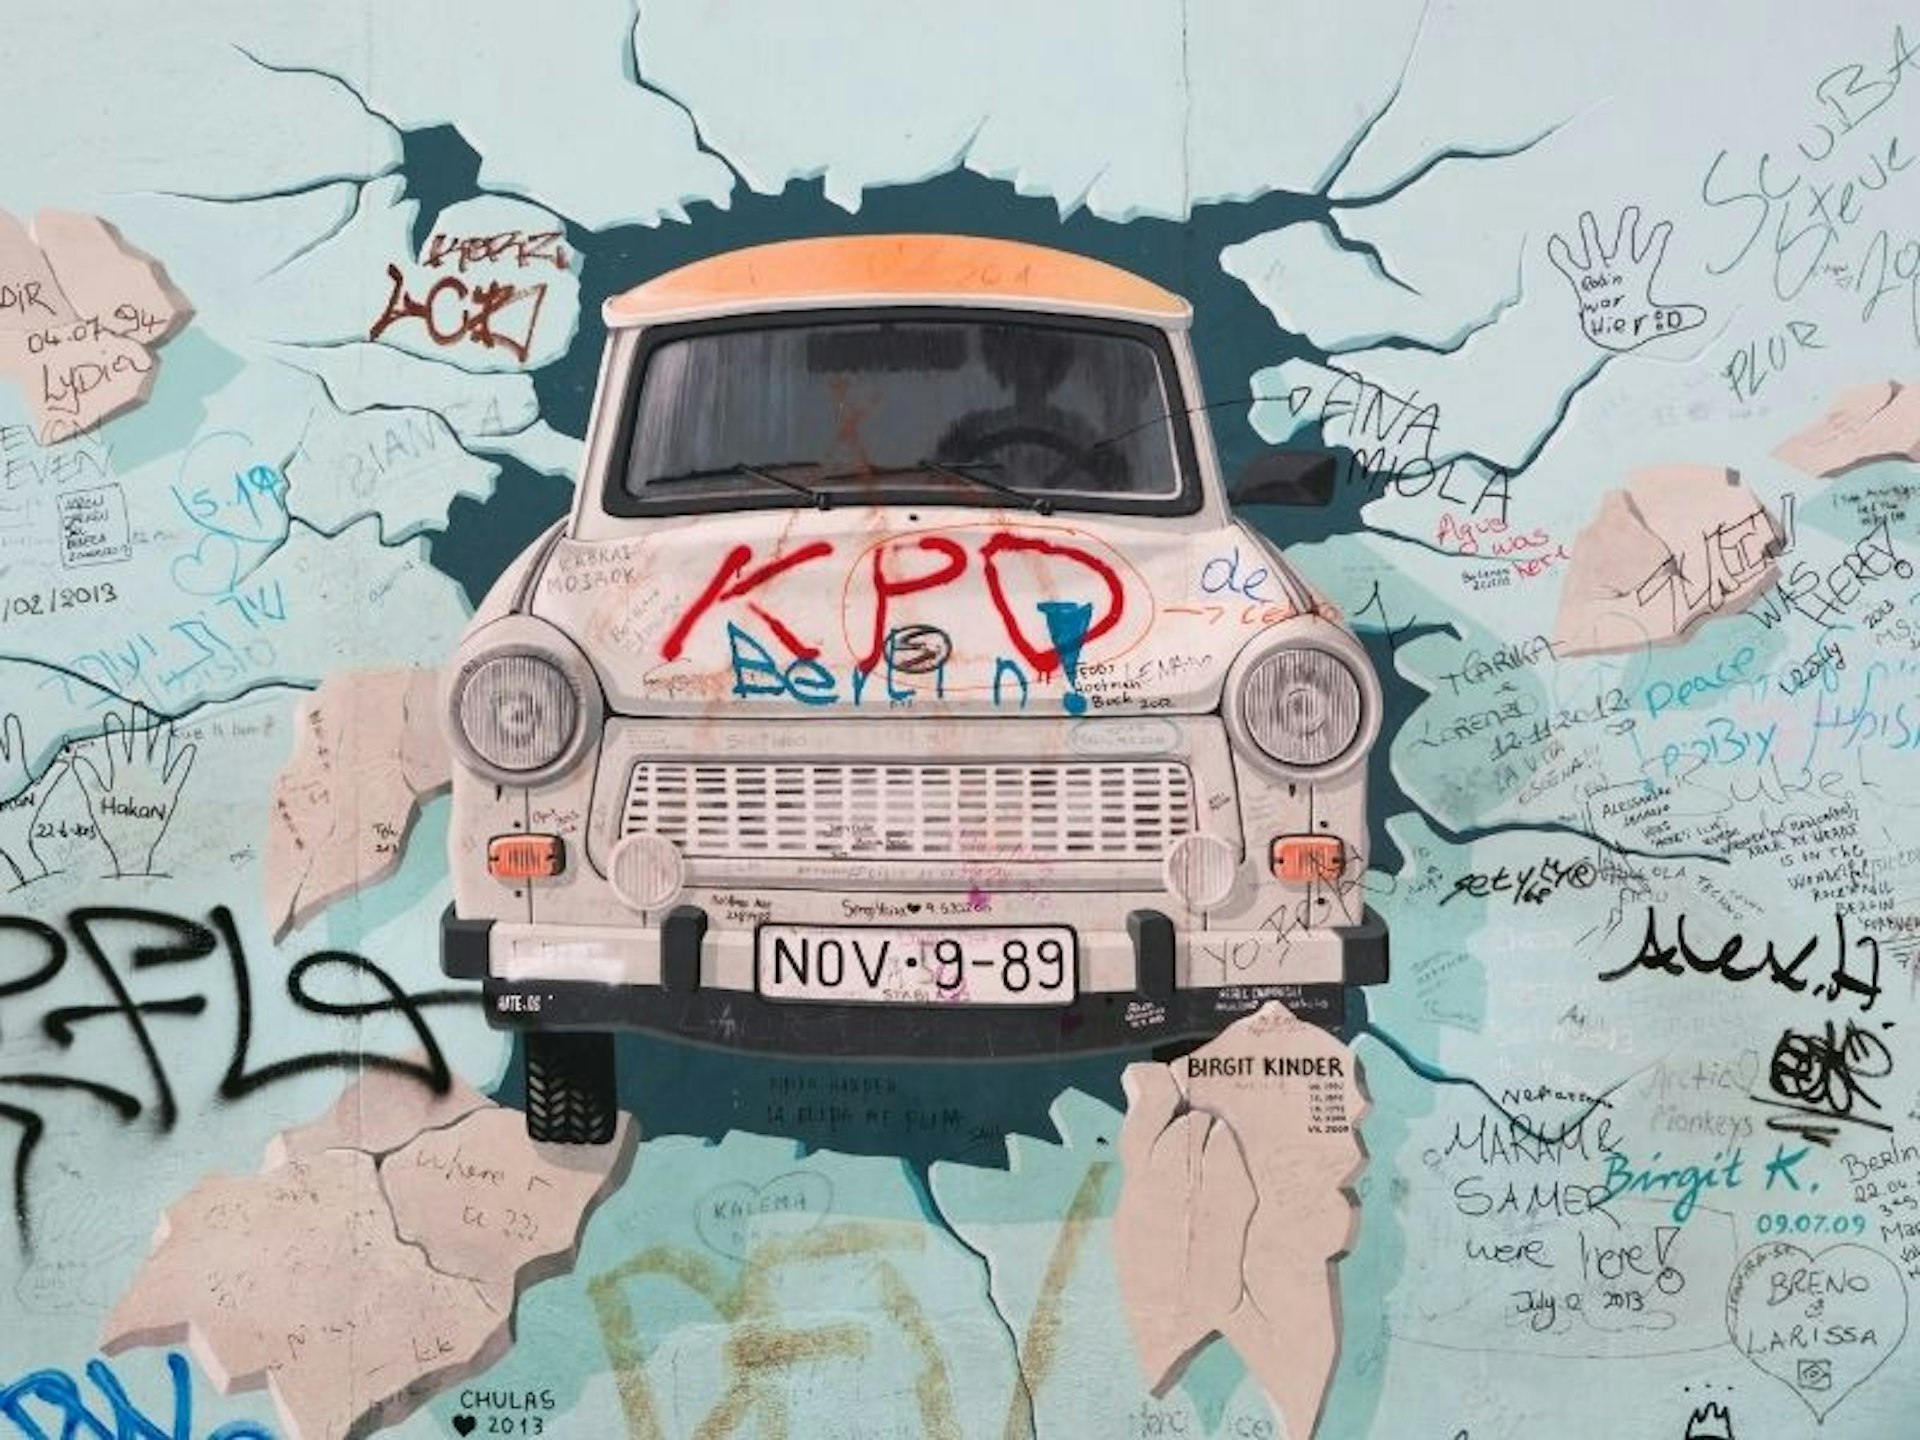 Image of a car bursting through a wall at the East Side Gallery in Berlin